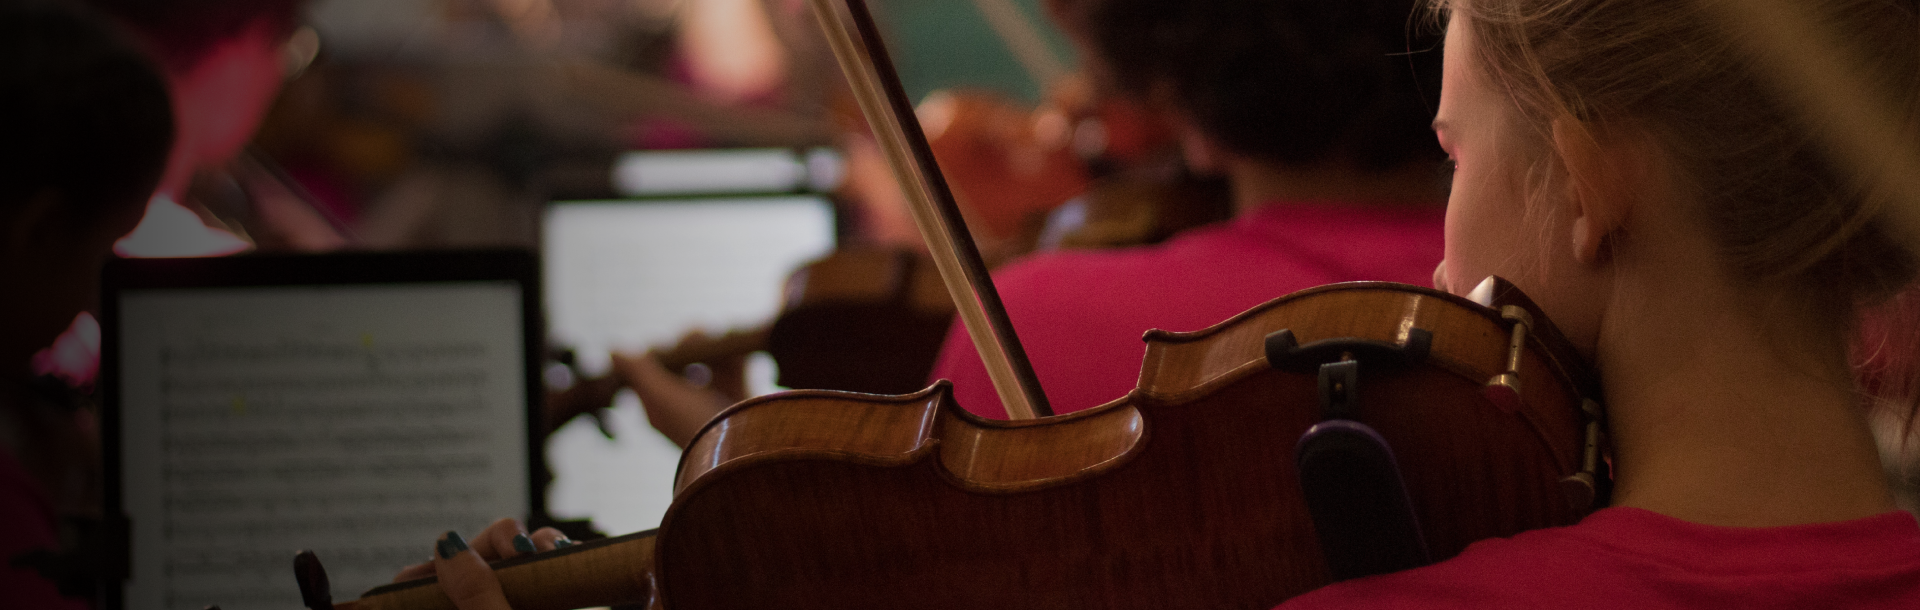 Over-the-shoulder image of students playing the violin and looking at music on iPads